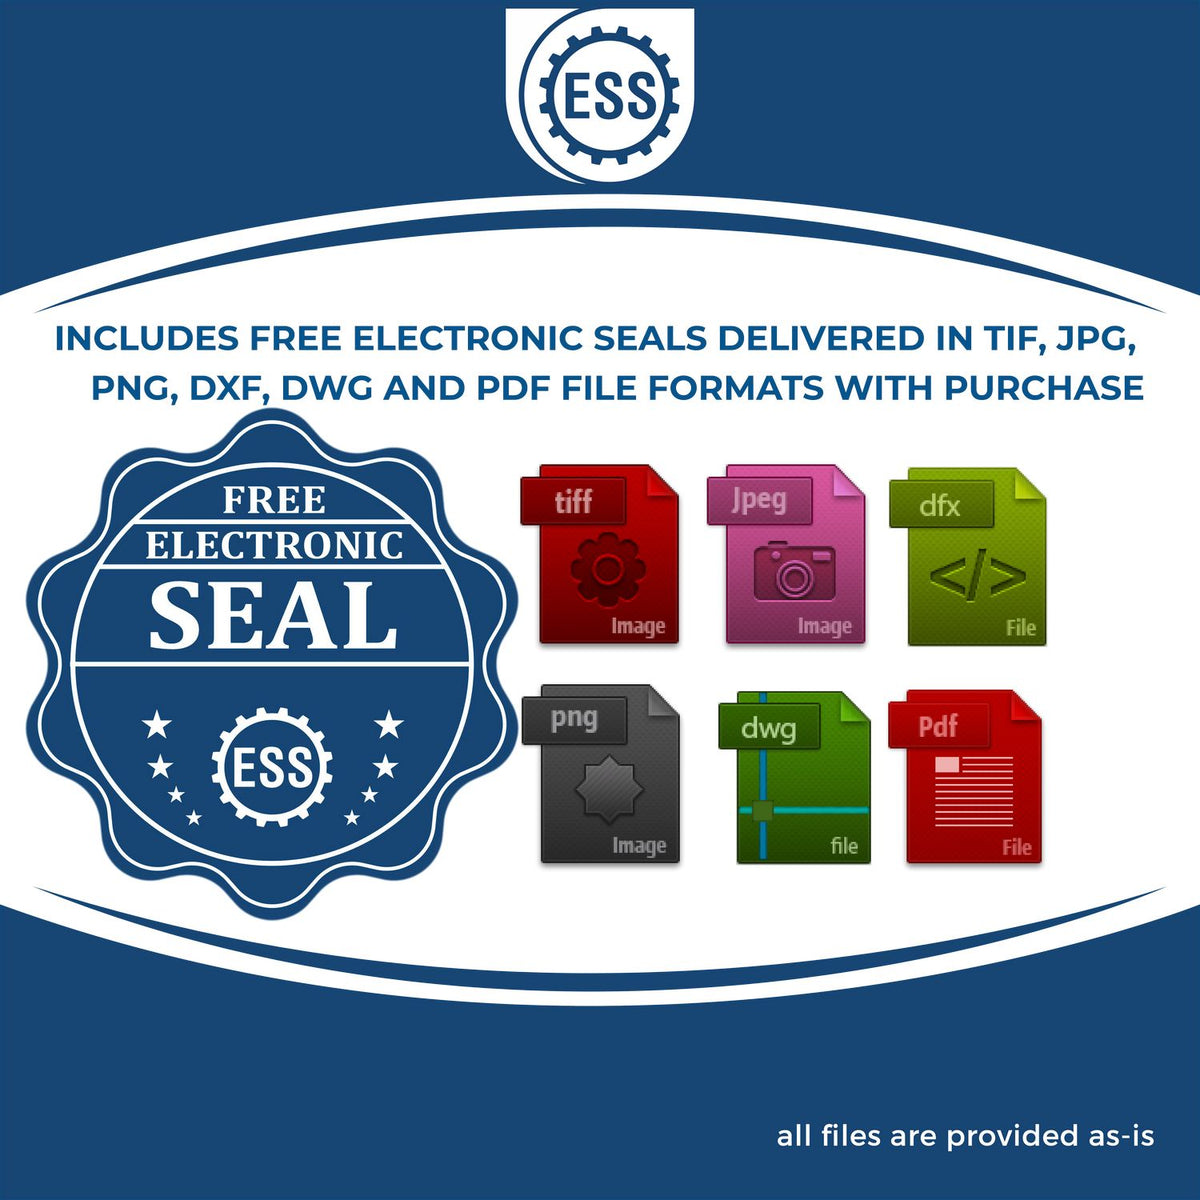 An infographic for the free electronic seal for the Heavy Duty Cast Iron Maryland Geologist Seal Embosser illustrating the different file type icons such as DXF, DWG, TIF, JPG and PNG.